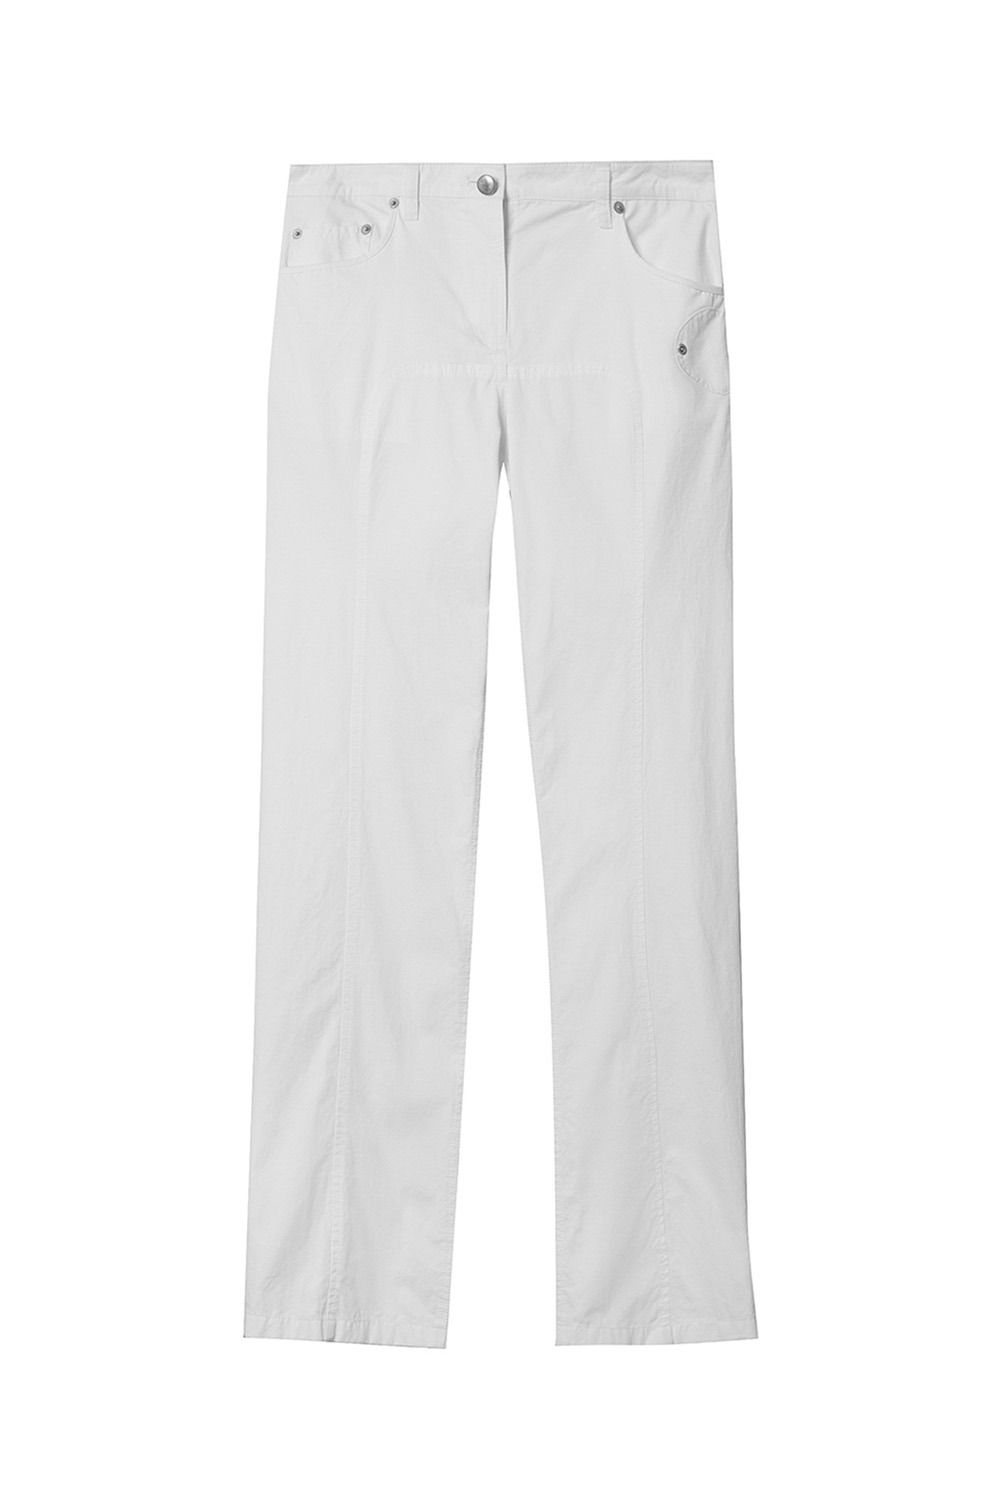 Lined Straight Pants_White